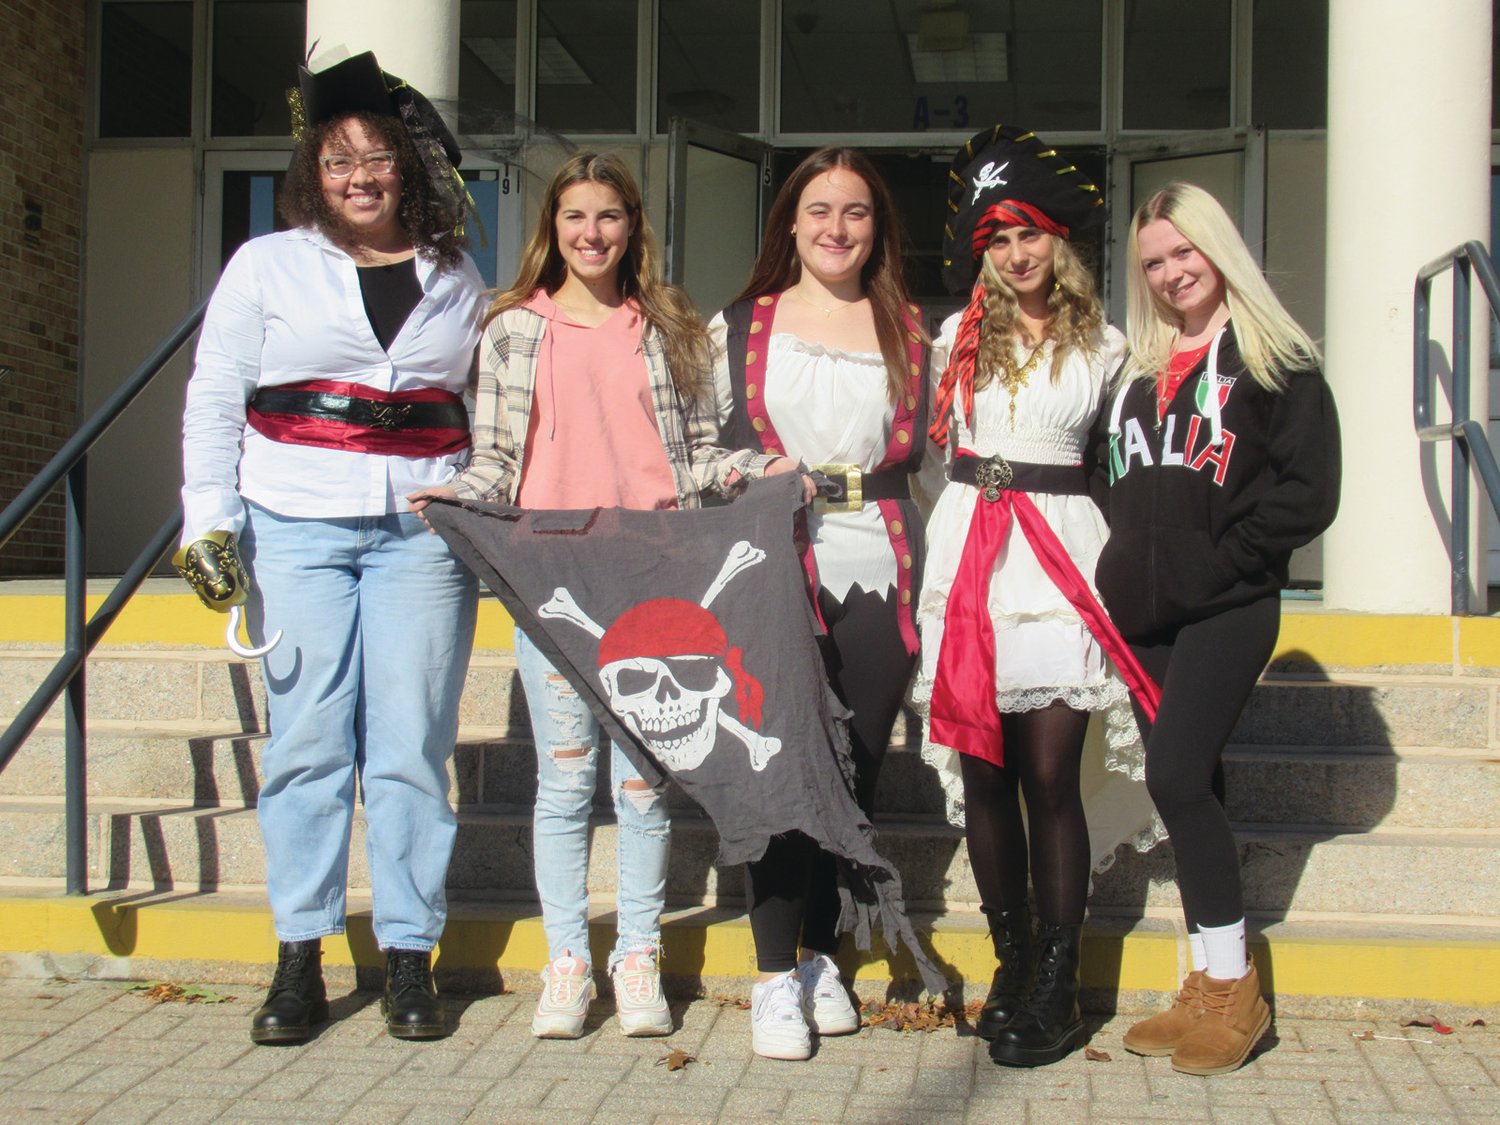 CLASSIC CANDIDATES: Students who make up the Homecoming Queen Court are, from left: Clarianna Crichlow, Emily Iannuccilli, Janet Clements, Charlene Hohlmaier and Rileigh Richard.